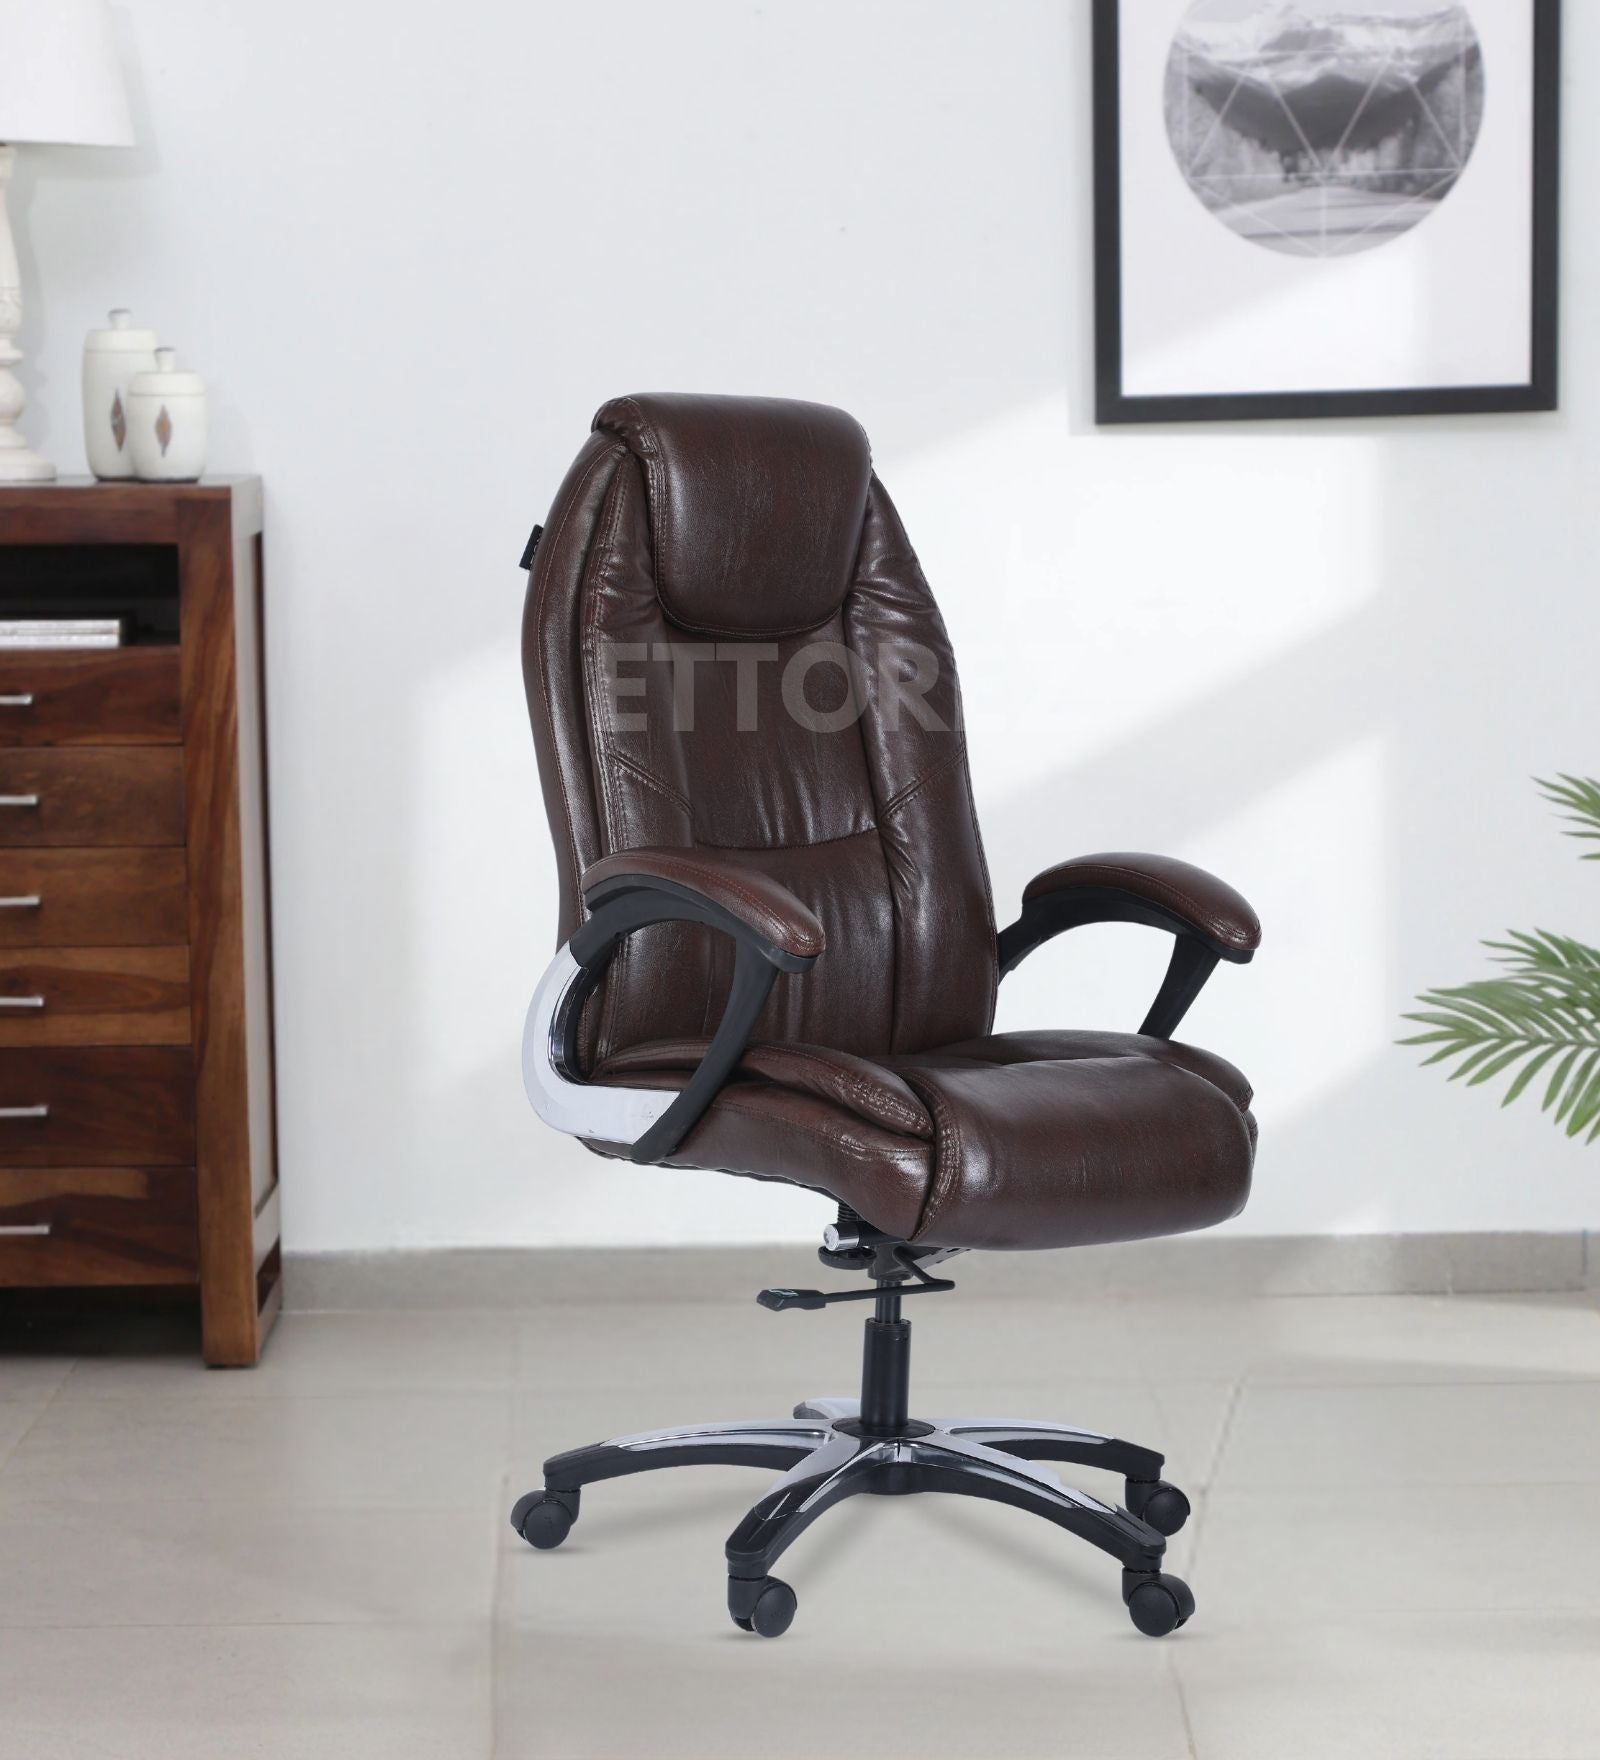 Ettorez AMBER High Back Leatherette Office Chair